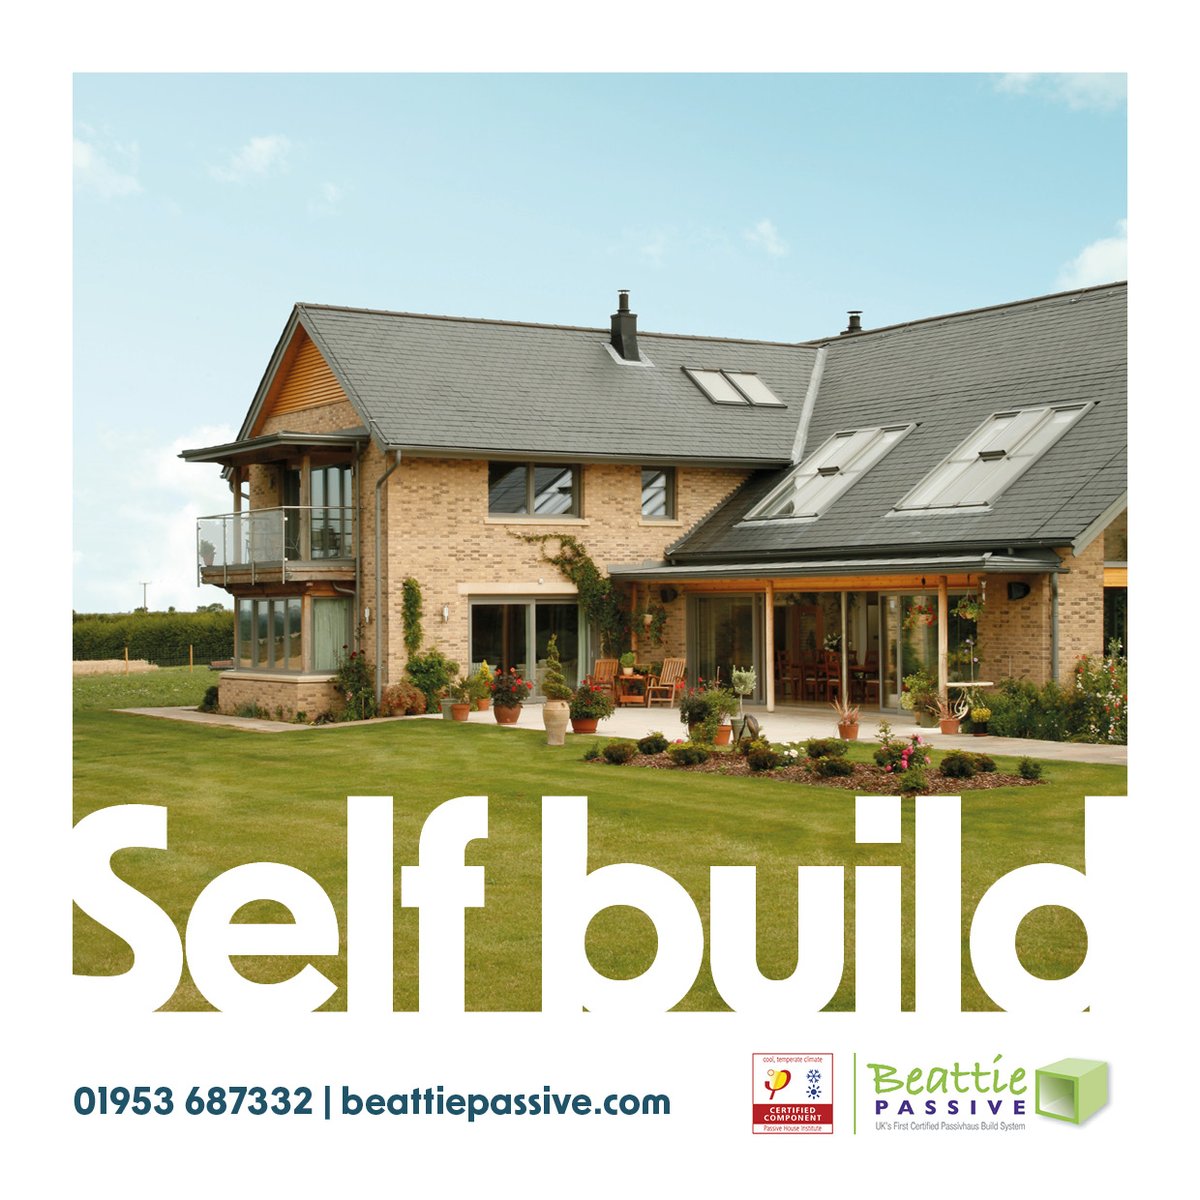 Want to build your own #Passivhaus? To start your #selfbuild journey with Beattie Passive, contact our client services manager Simon Clarke on 07501 166631 or email simonclarke@beattiepassive.com And don’t forget to ask for a copy of our new #brochure